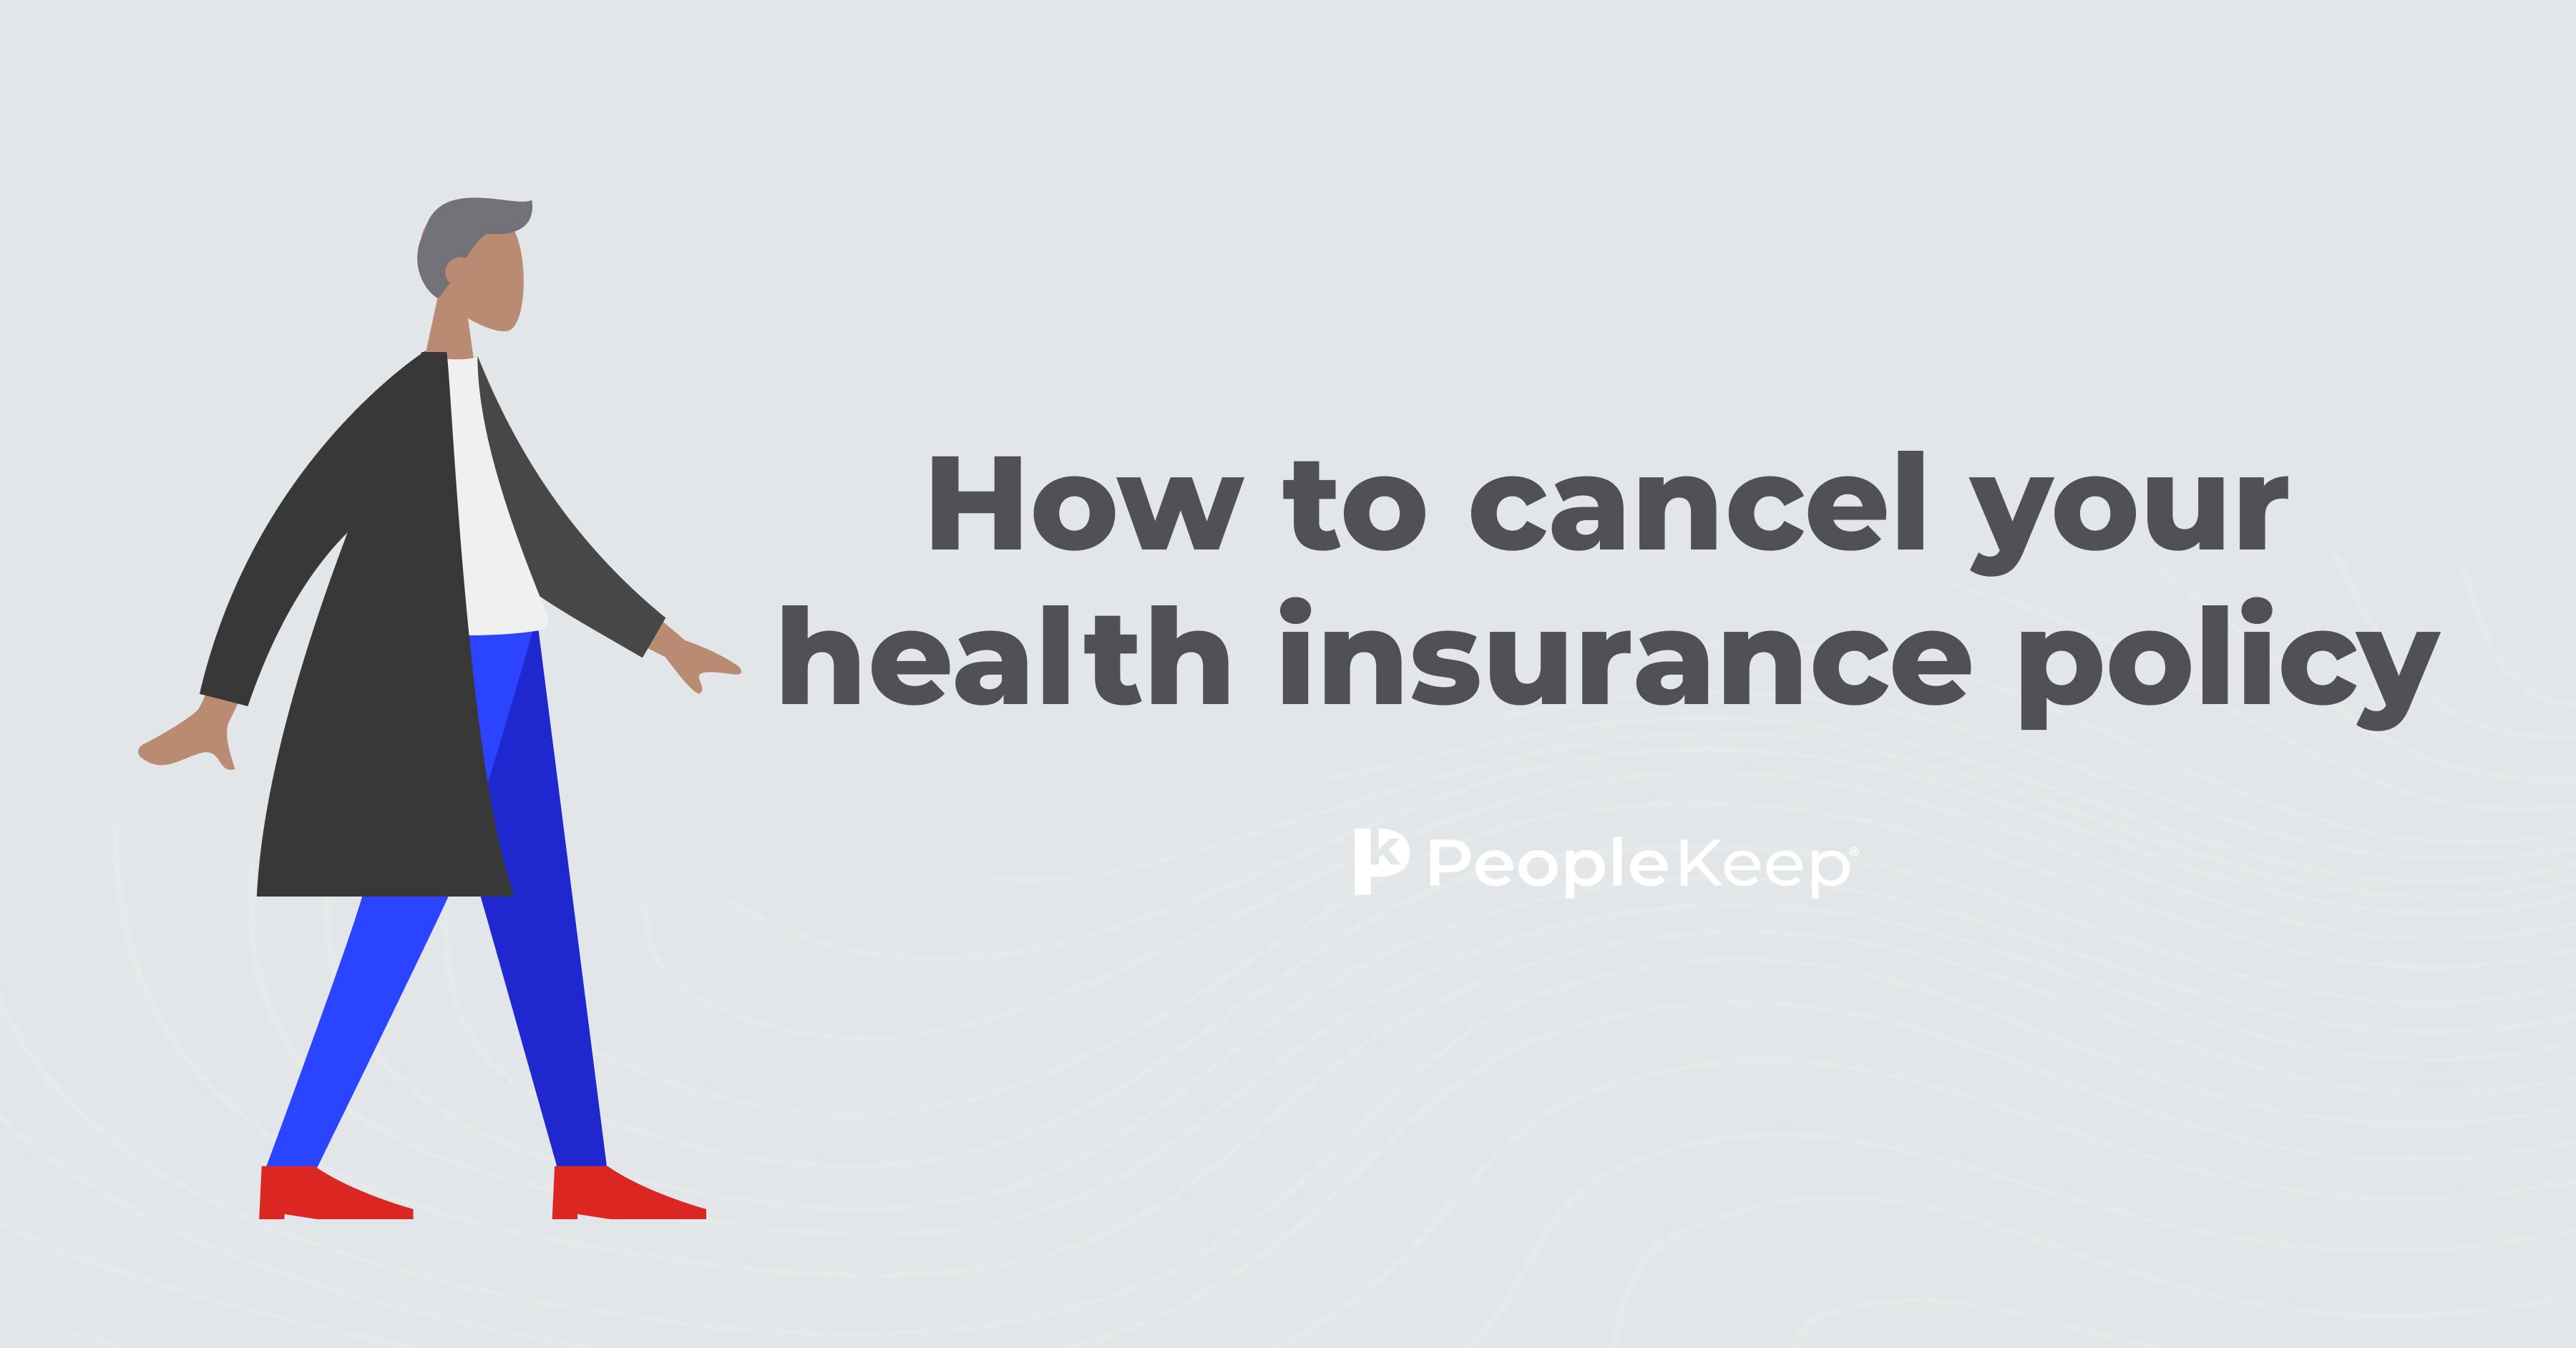 How to cancel your health insurance policy